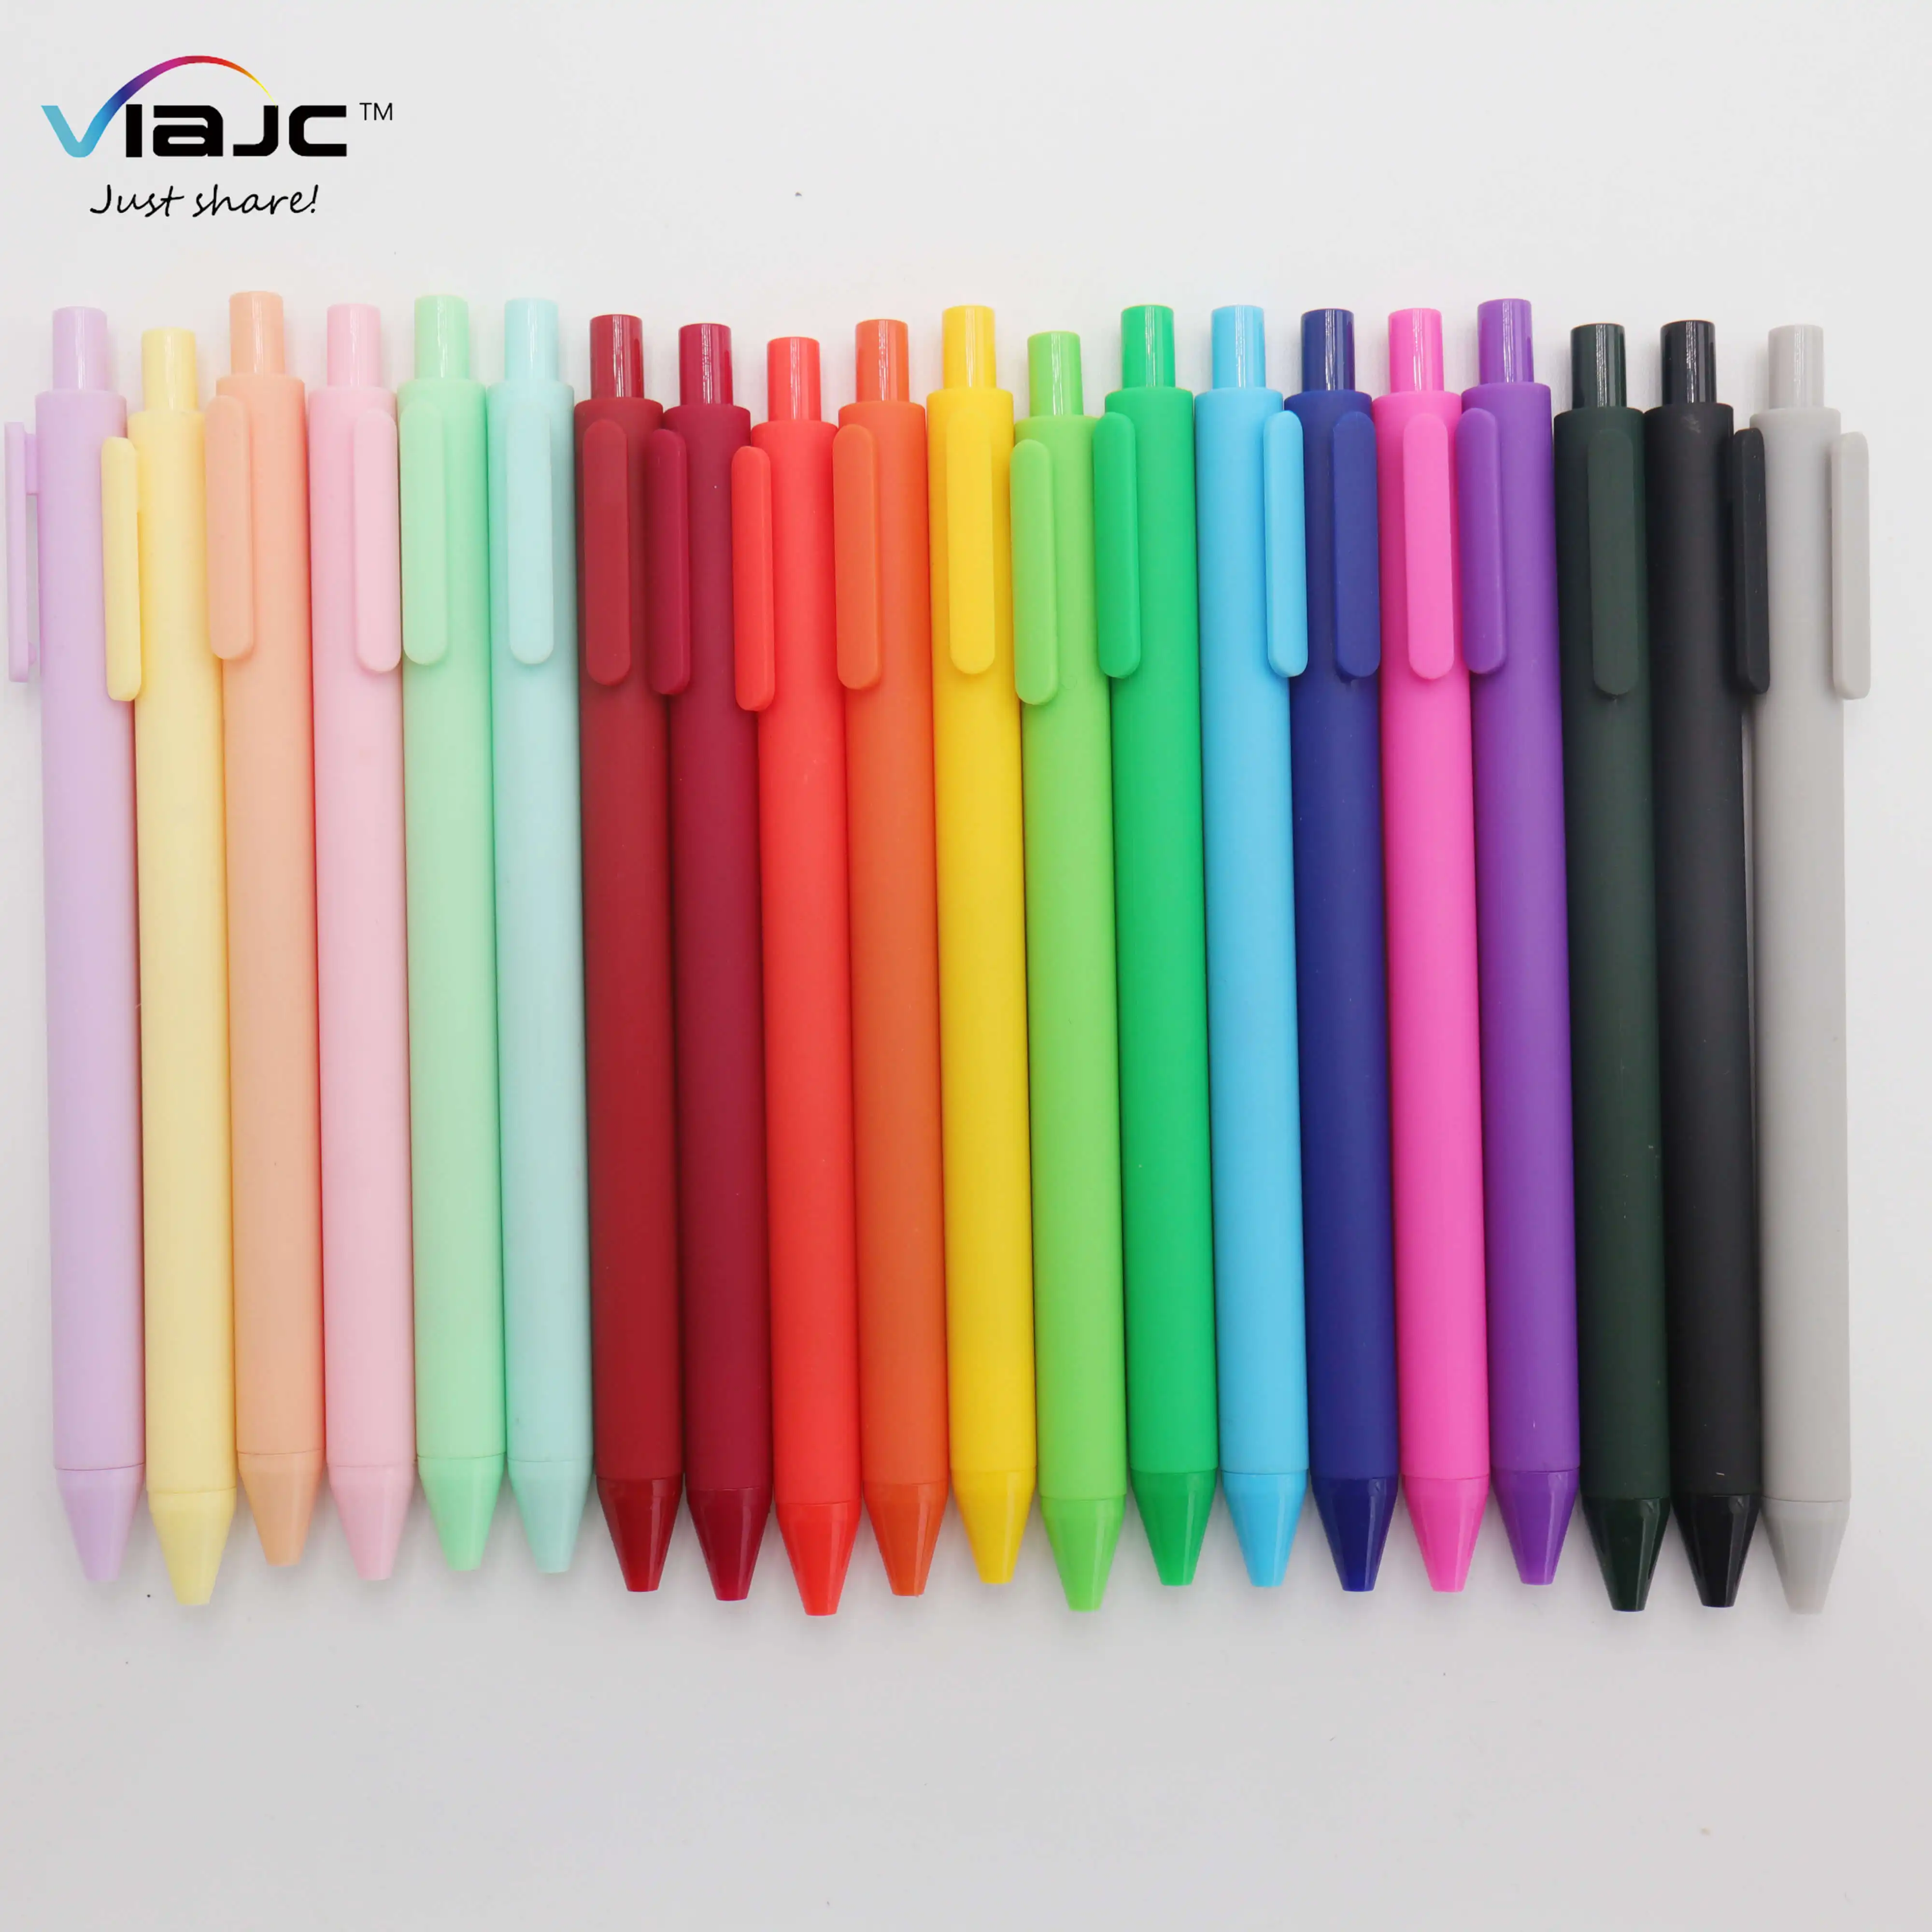 Customized Pen With Logo Soft Touch Pen Ink Multi Color Soft Rubber Finished Plastic Click Gel Ink Pen With Fine Point